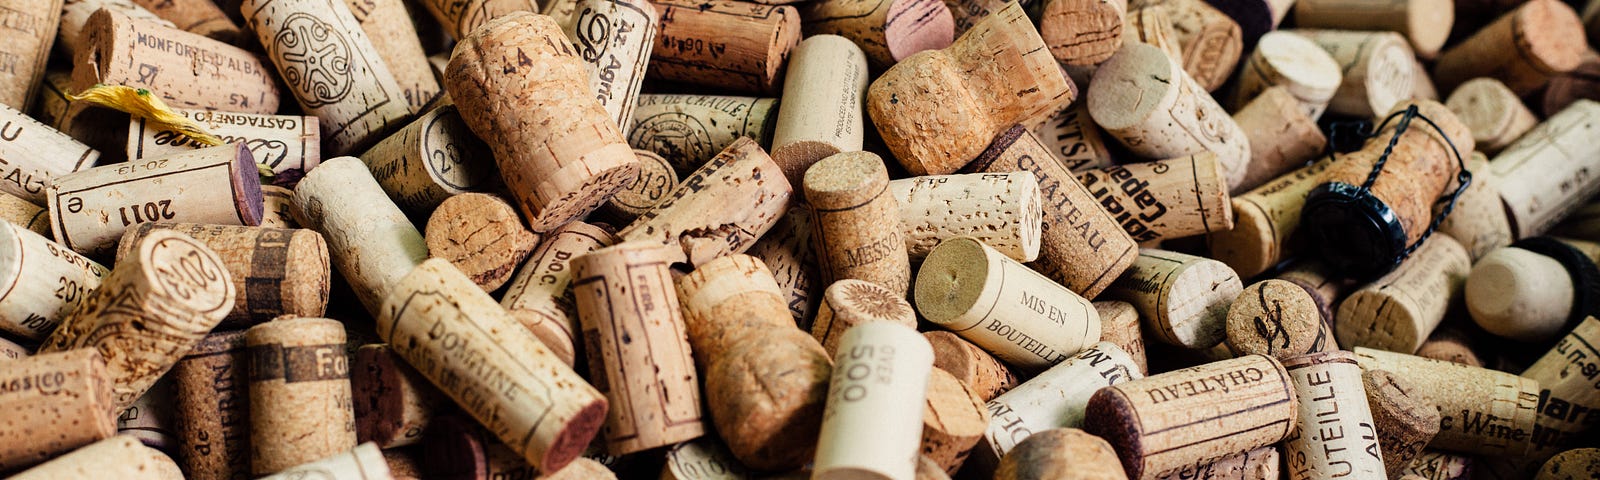 Corks from hundreds of different wine bottles lie discarded in a pile.